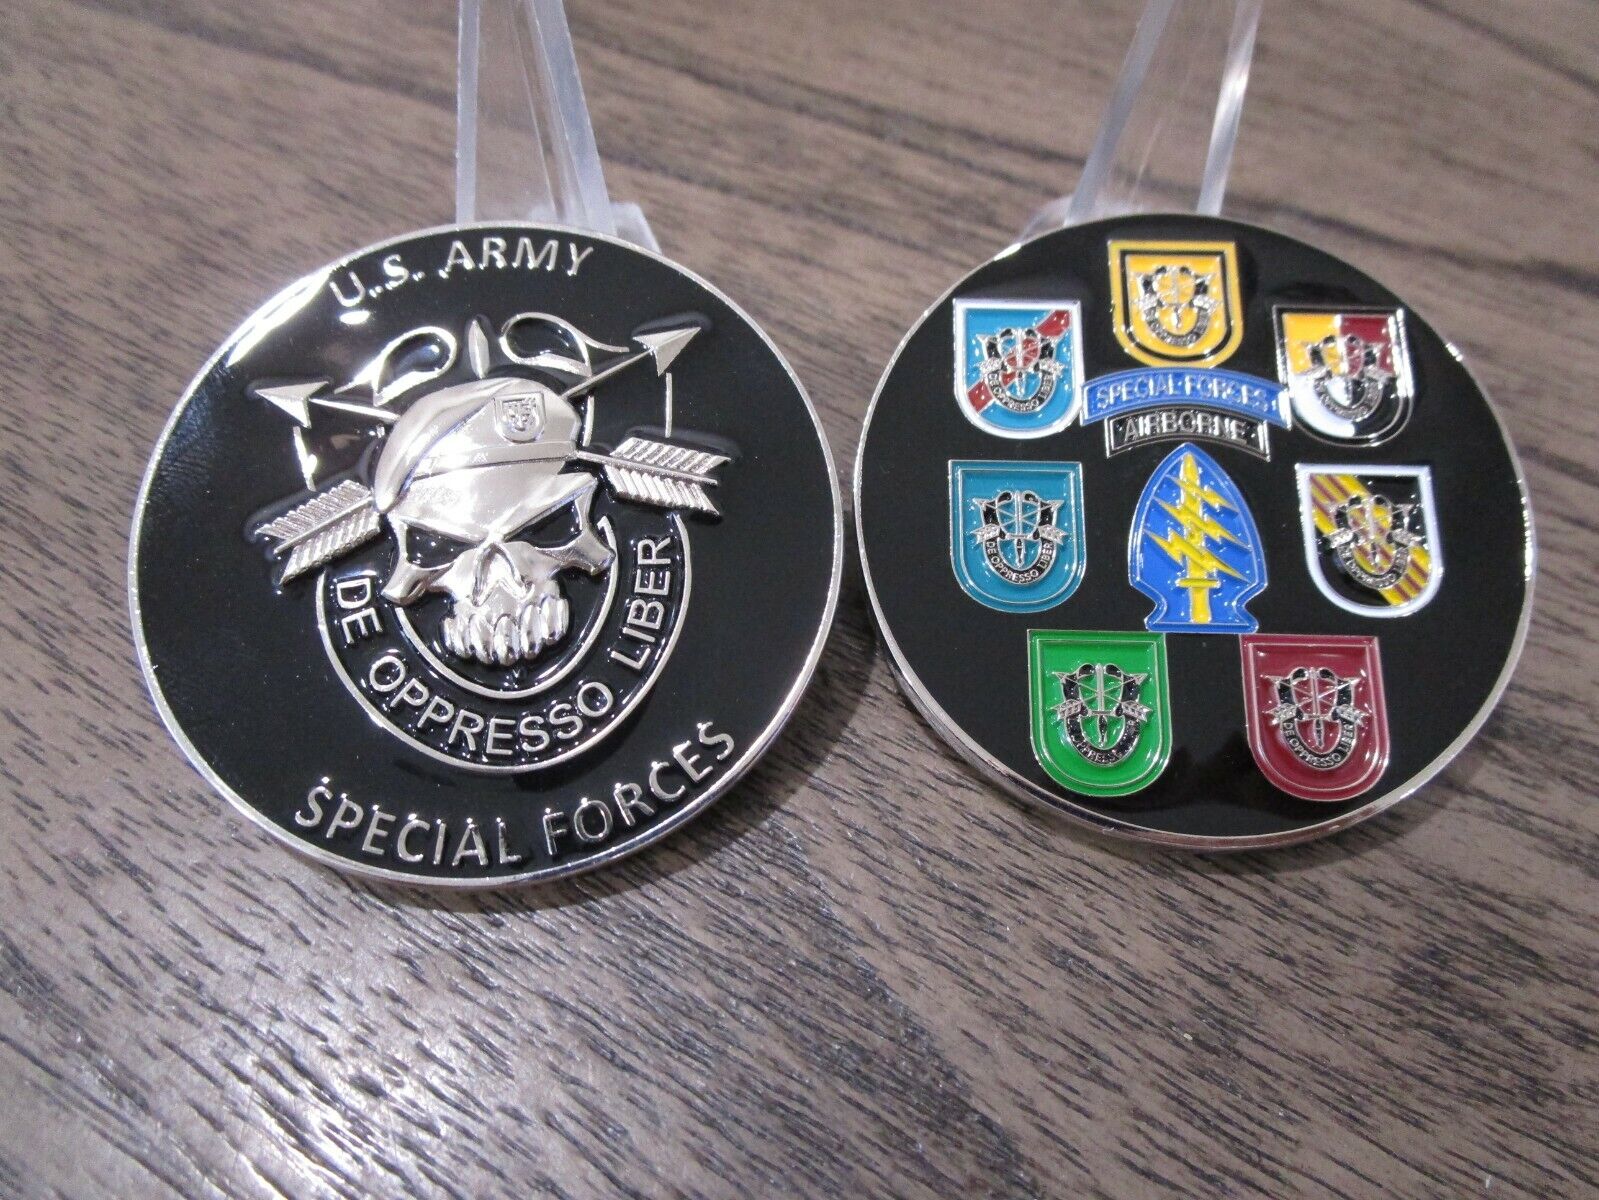 US Army Special Forces Group Airborne Green Berets Skull Challenge Coin